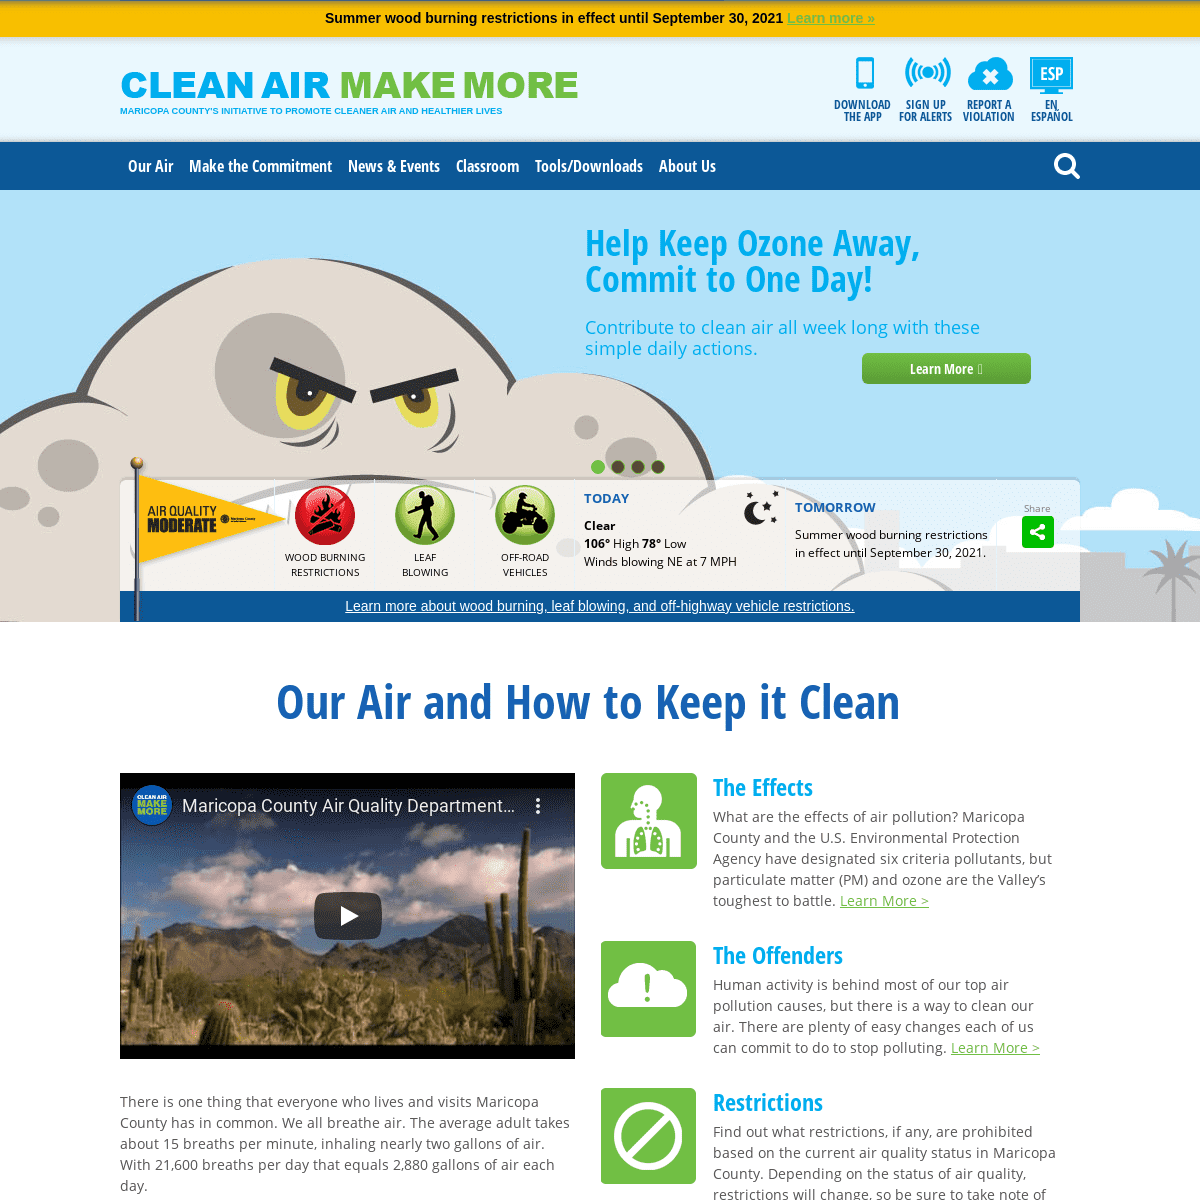 A complete backup of https://cleanairmakemore.com